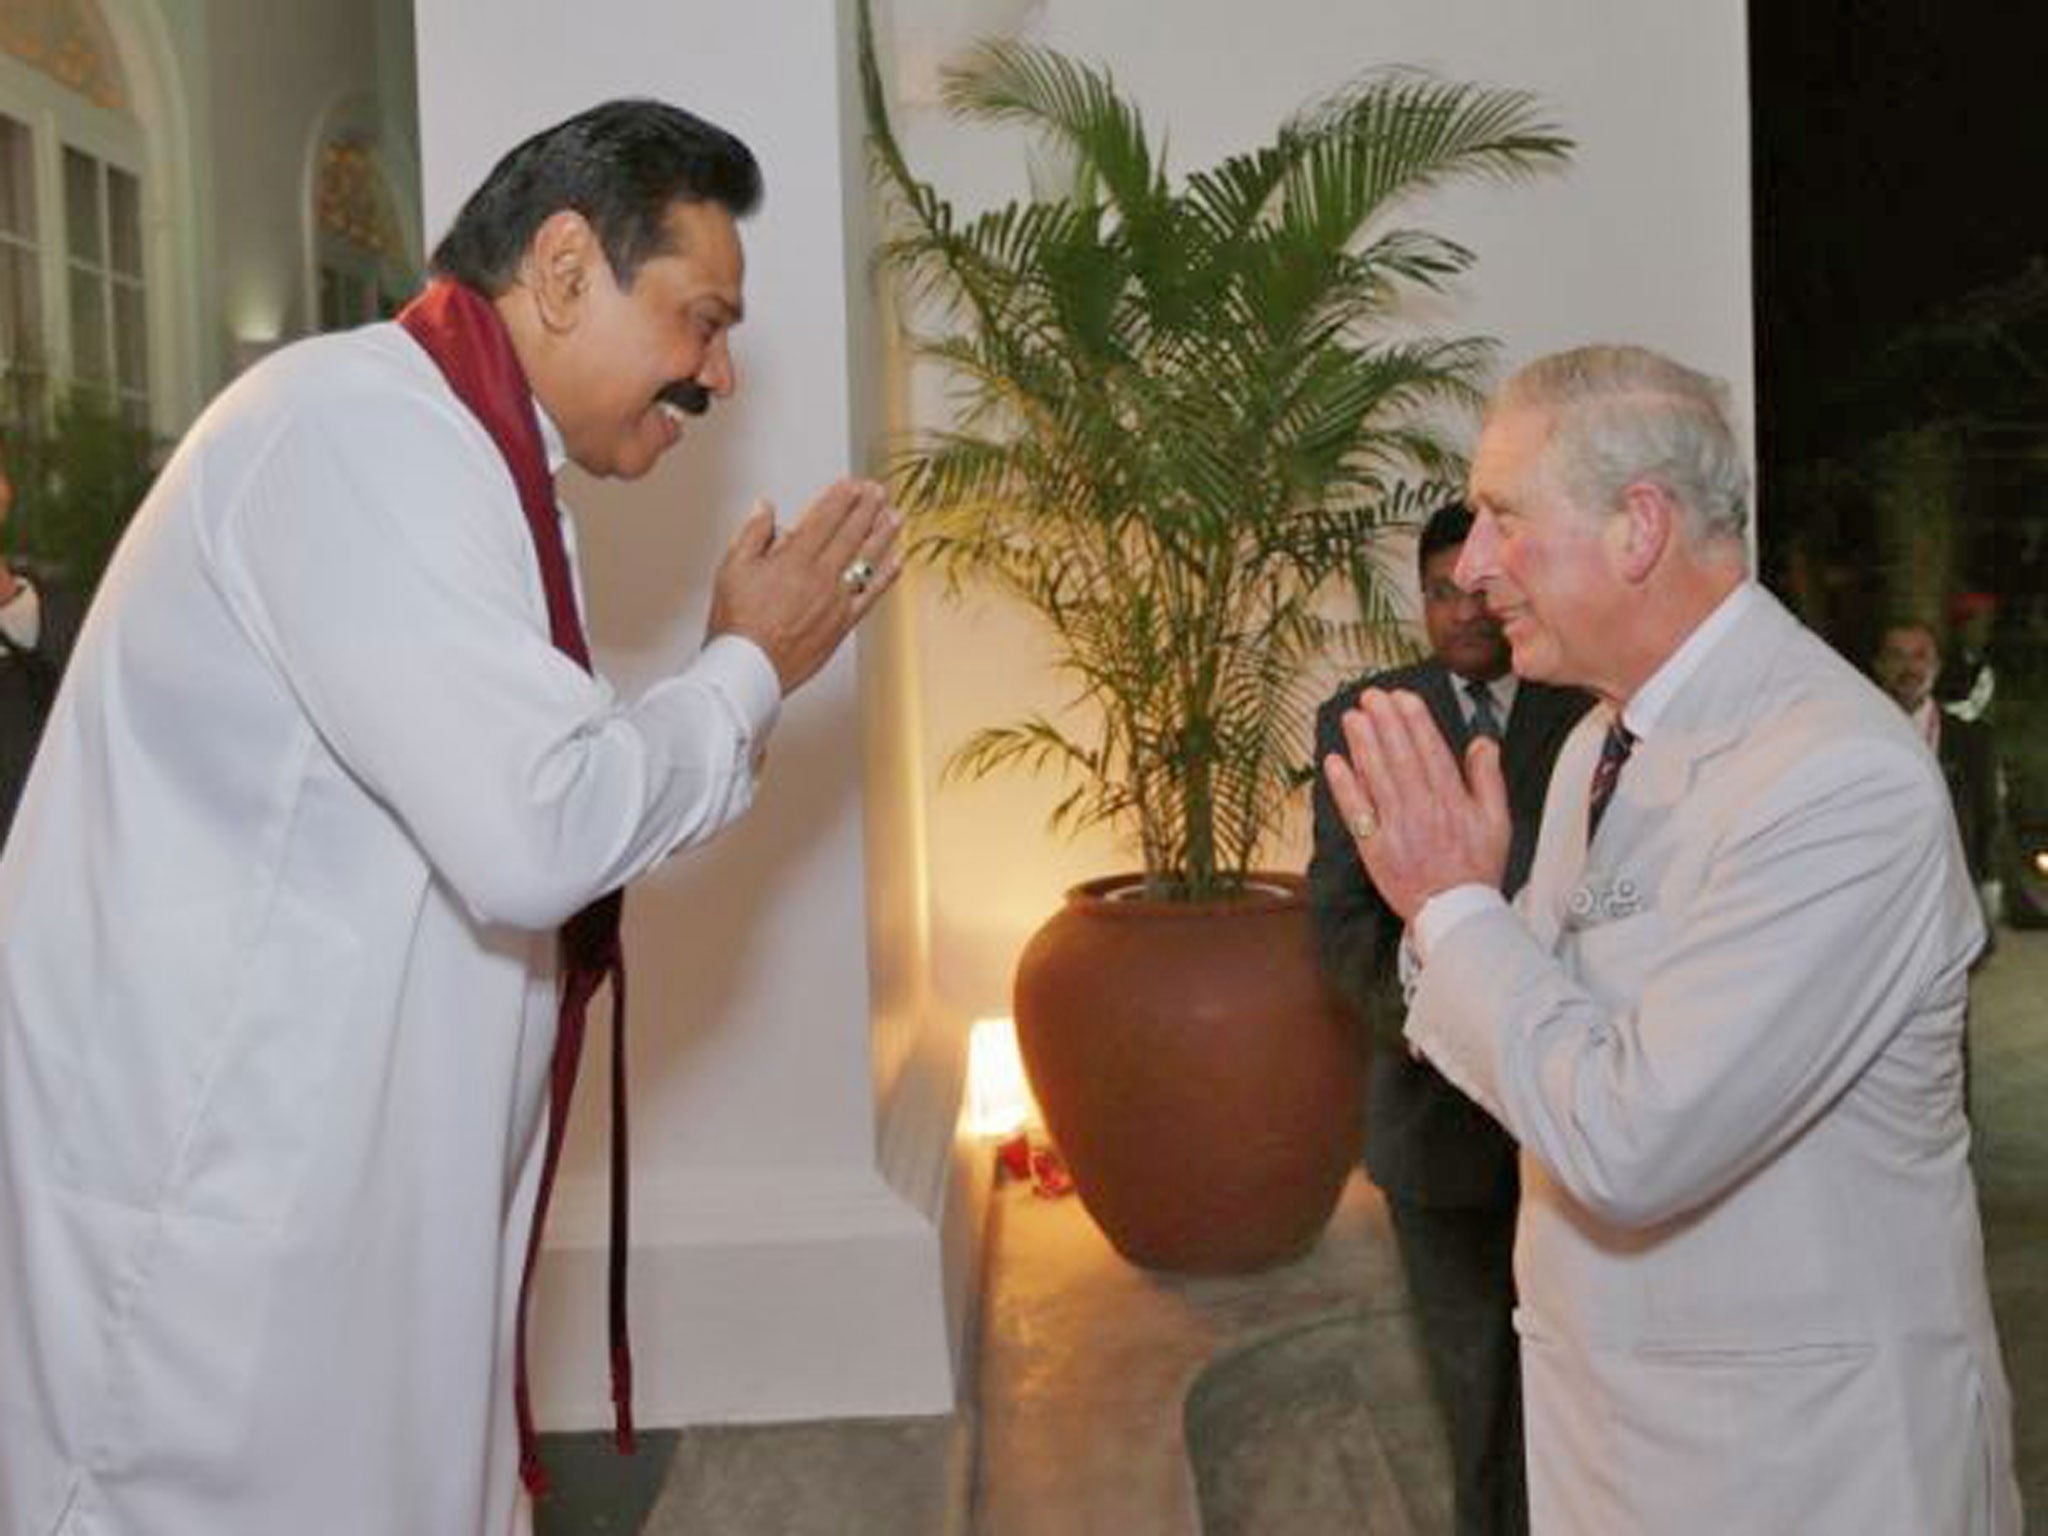 14 November 2013: Sri Lankan President Mahinda Rajapaksa greets Prince Charles during a reception at the President's House in Colombo, Sri Lanka. The Royal couple are visiting Sri Lanka in order to attend the 2013 Commonwealth Heads of Government Meeting